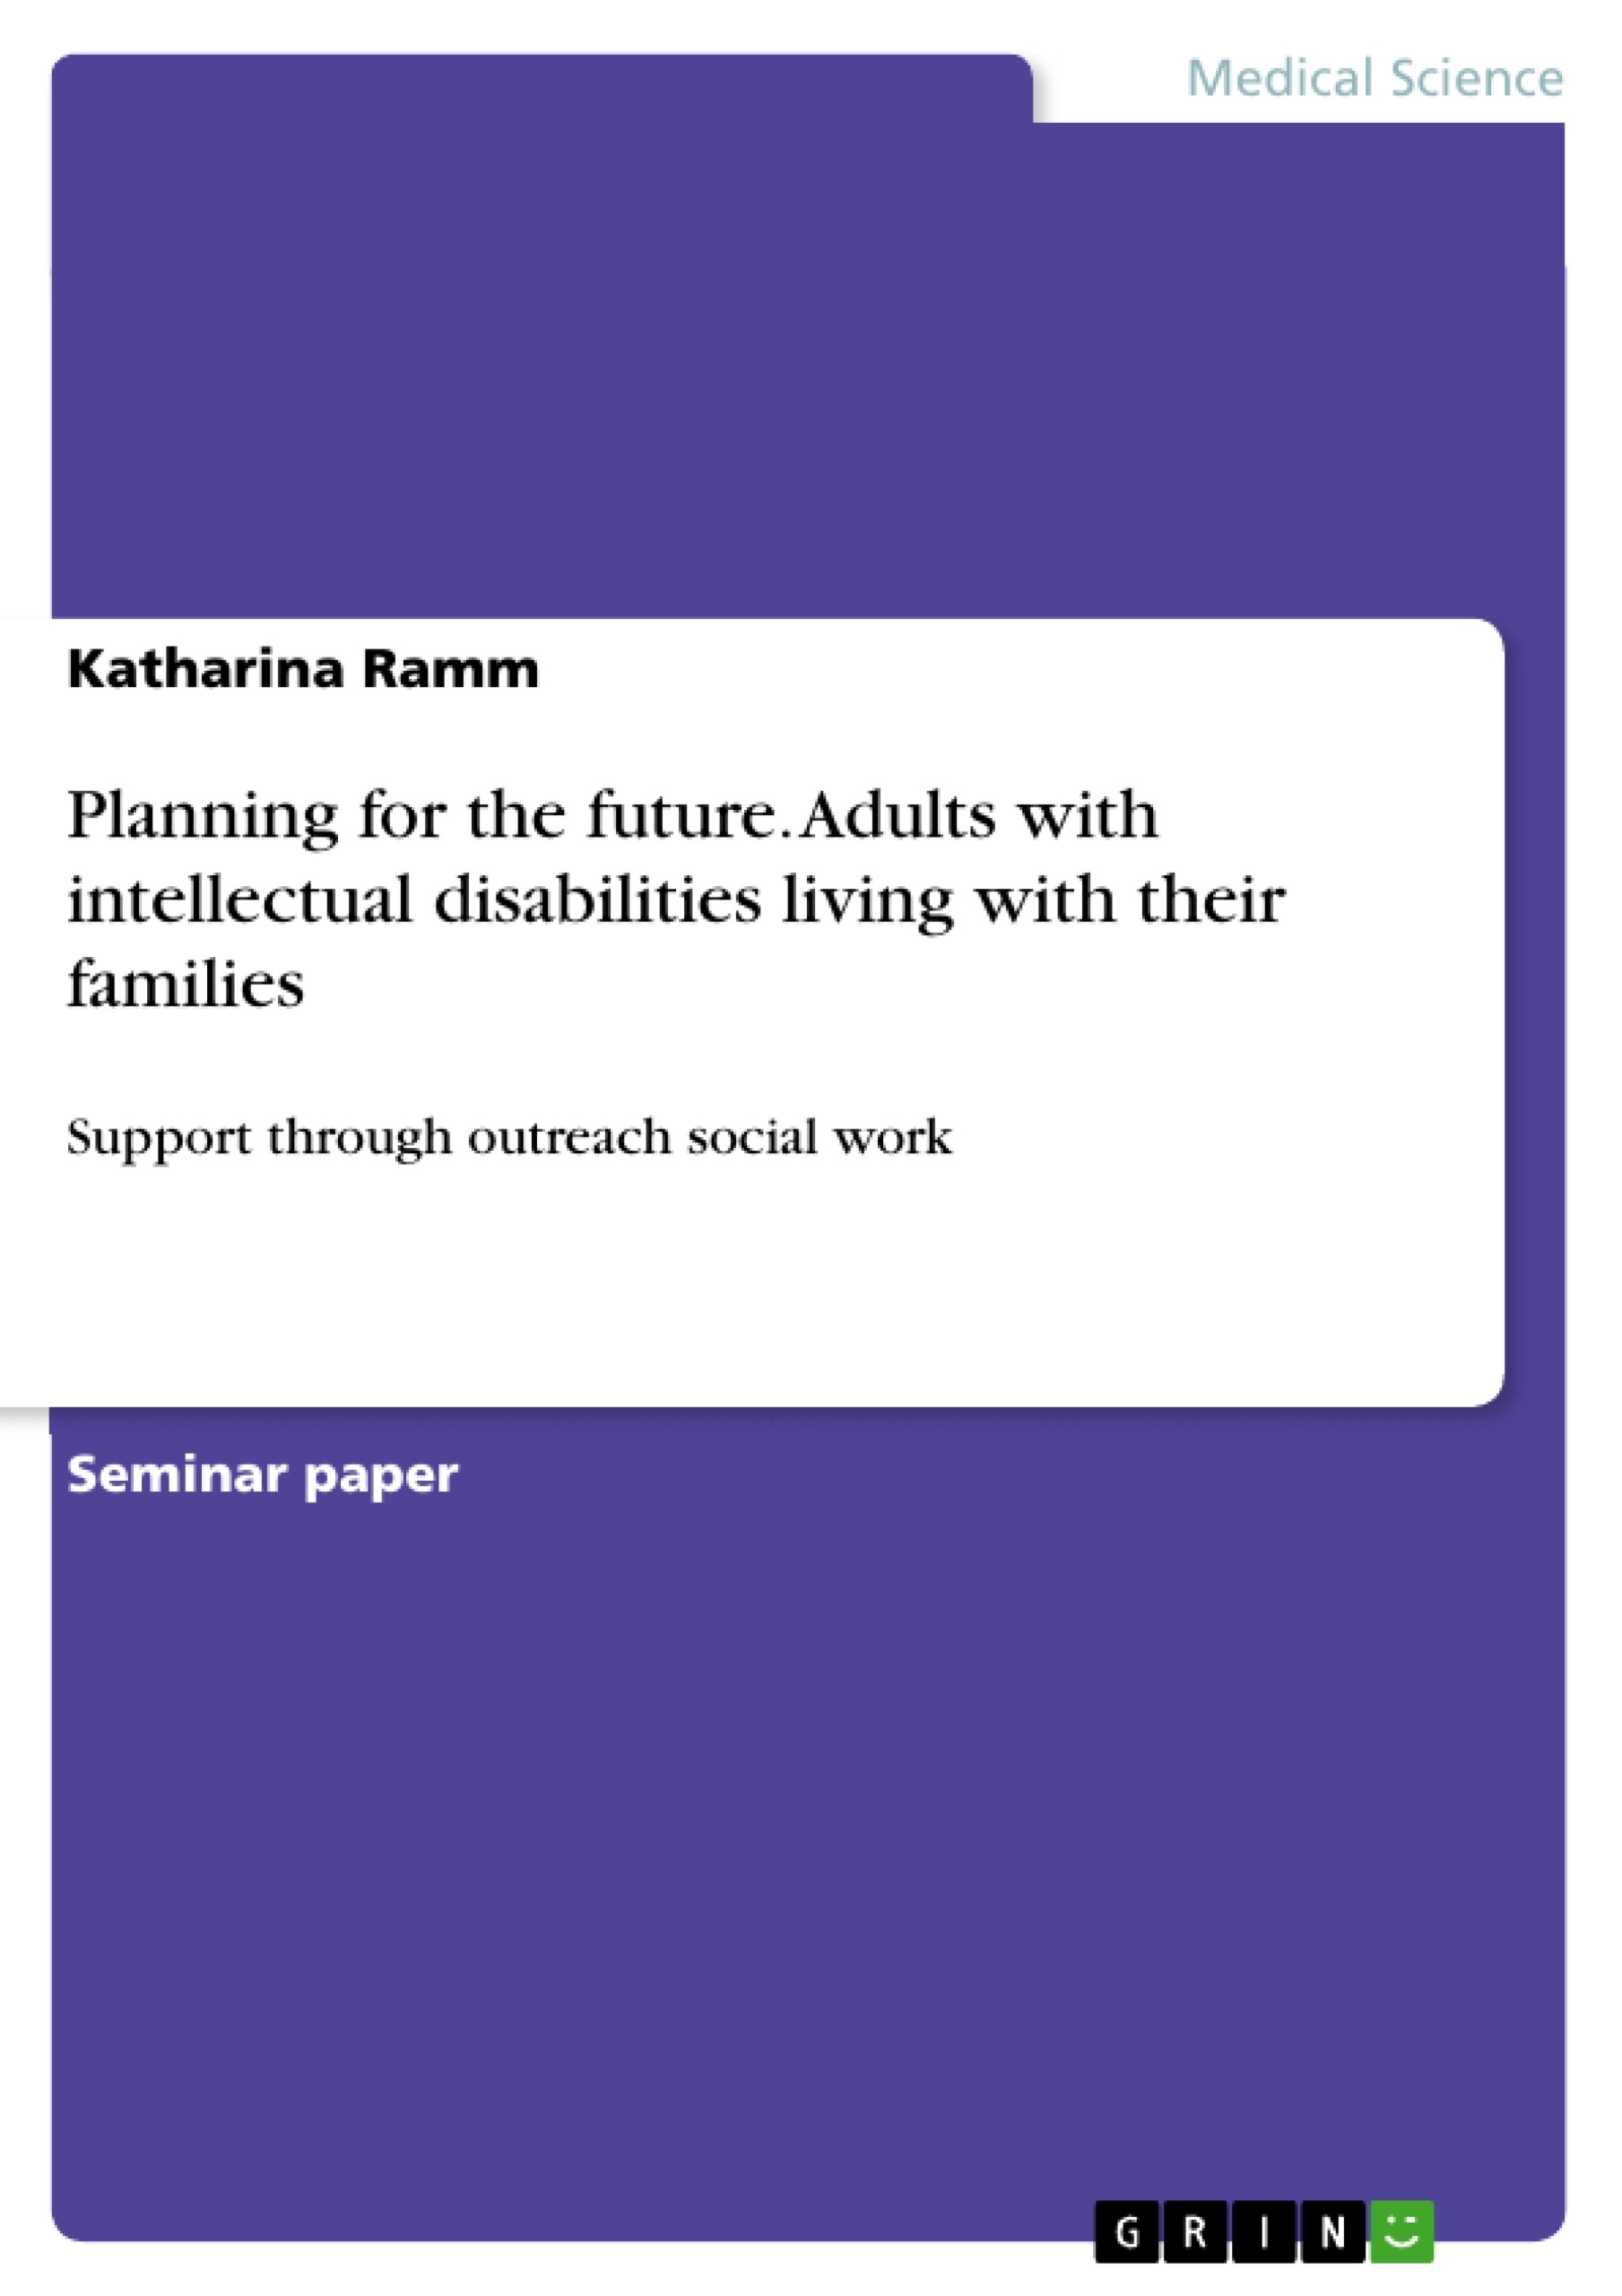 Title: Planning for the future. Adults with intellectual disabilities living with their families